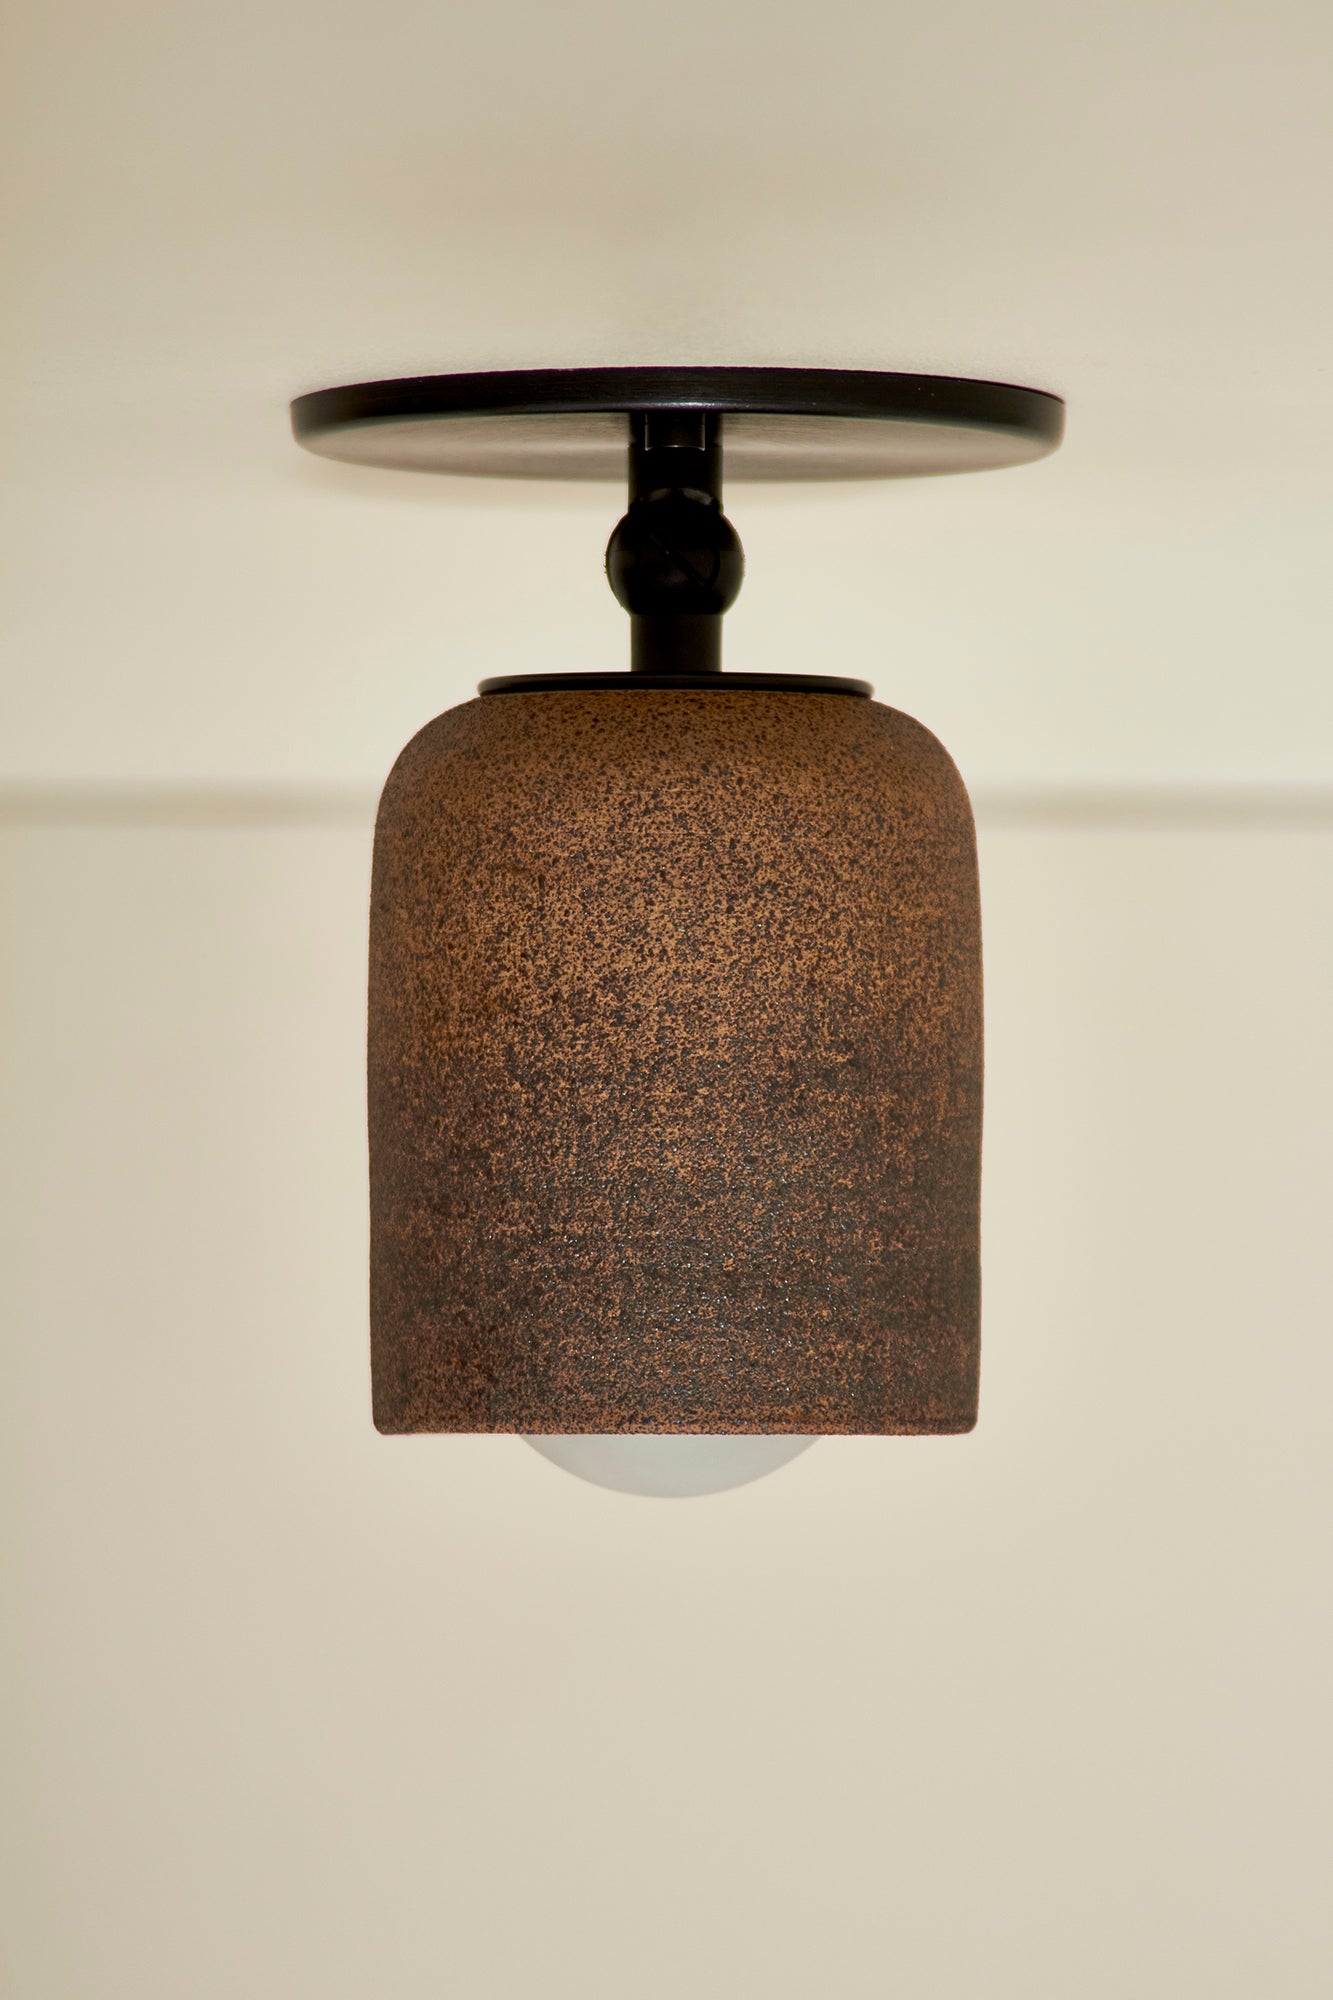 Terra 1 Short Articulating, Clay and Brushed Black, ceiling mounted. Image by Lawrence Furzey